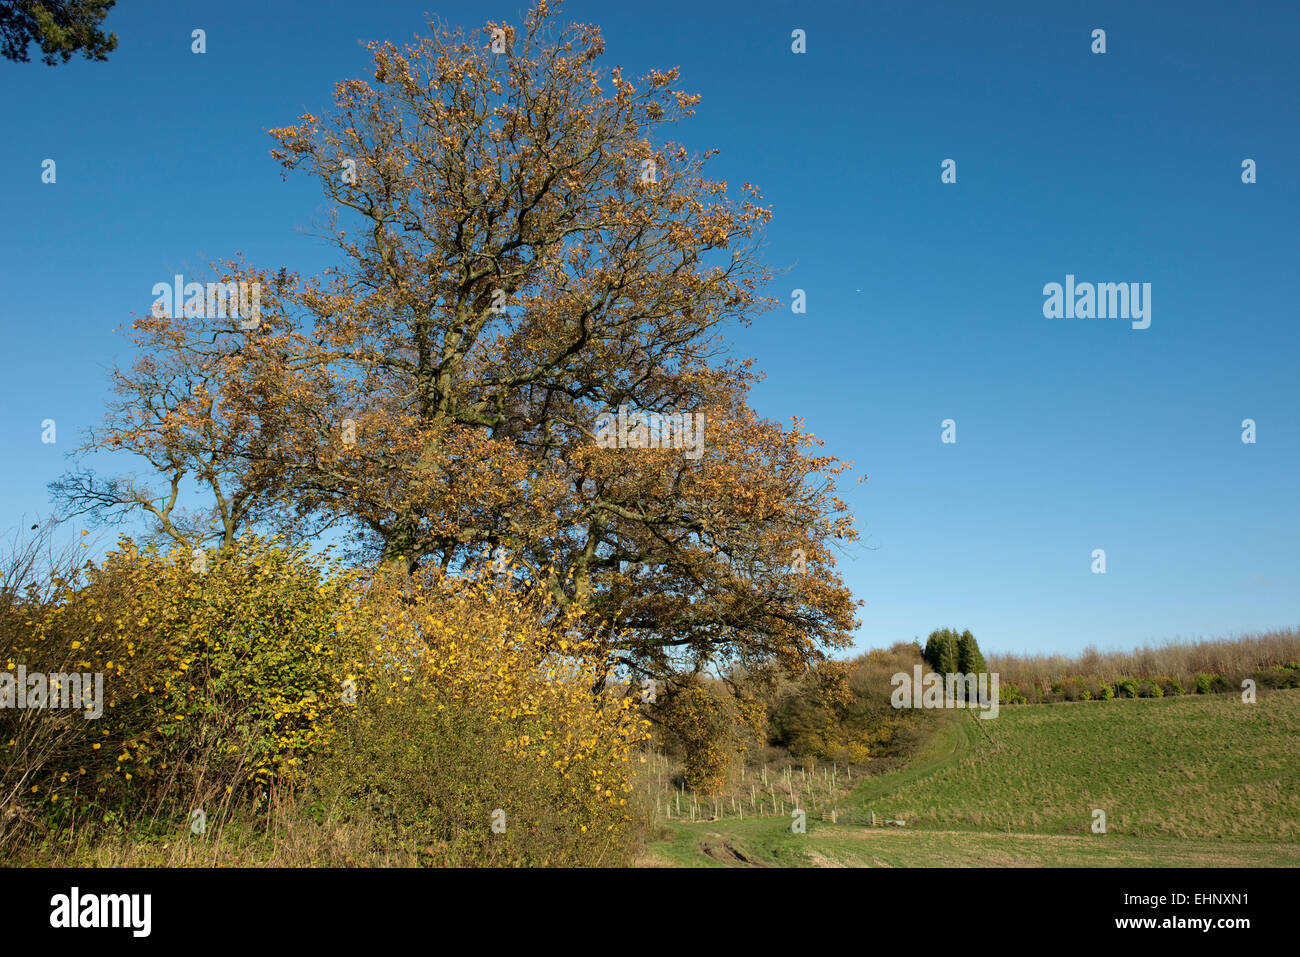 Oak tree and hazel bushes in vivid autumn colour in downland countryside on a bright colourful autumn day with blue sky. Stock Photo